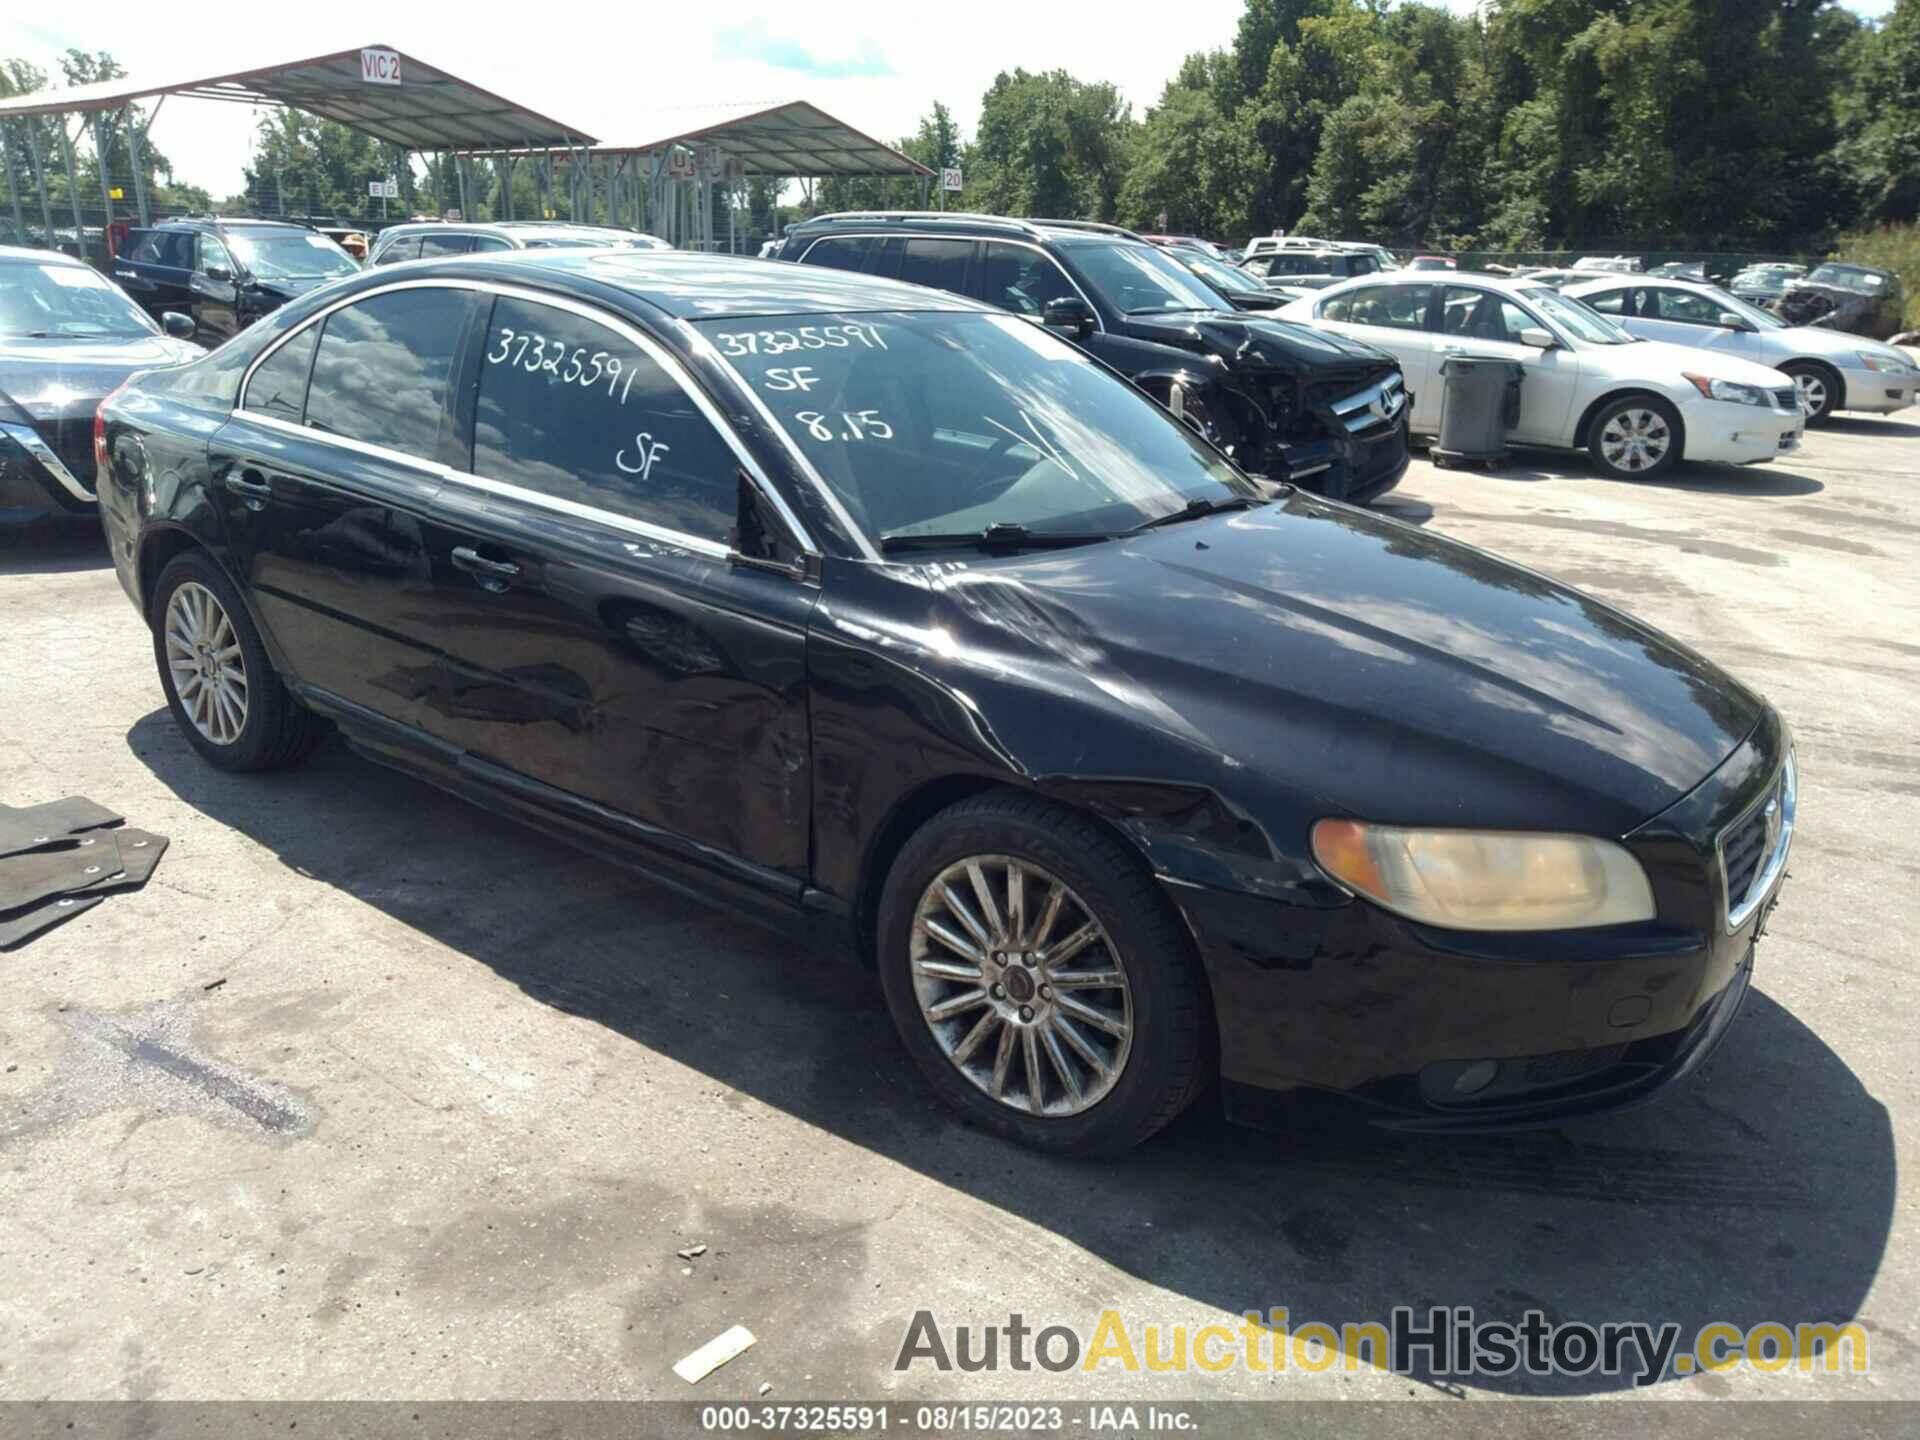 VOLVO S80 3.2L, YV1AS982481078466